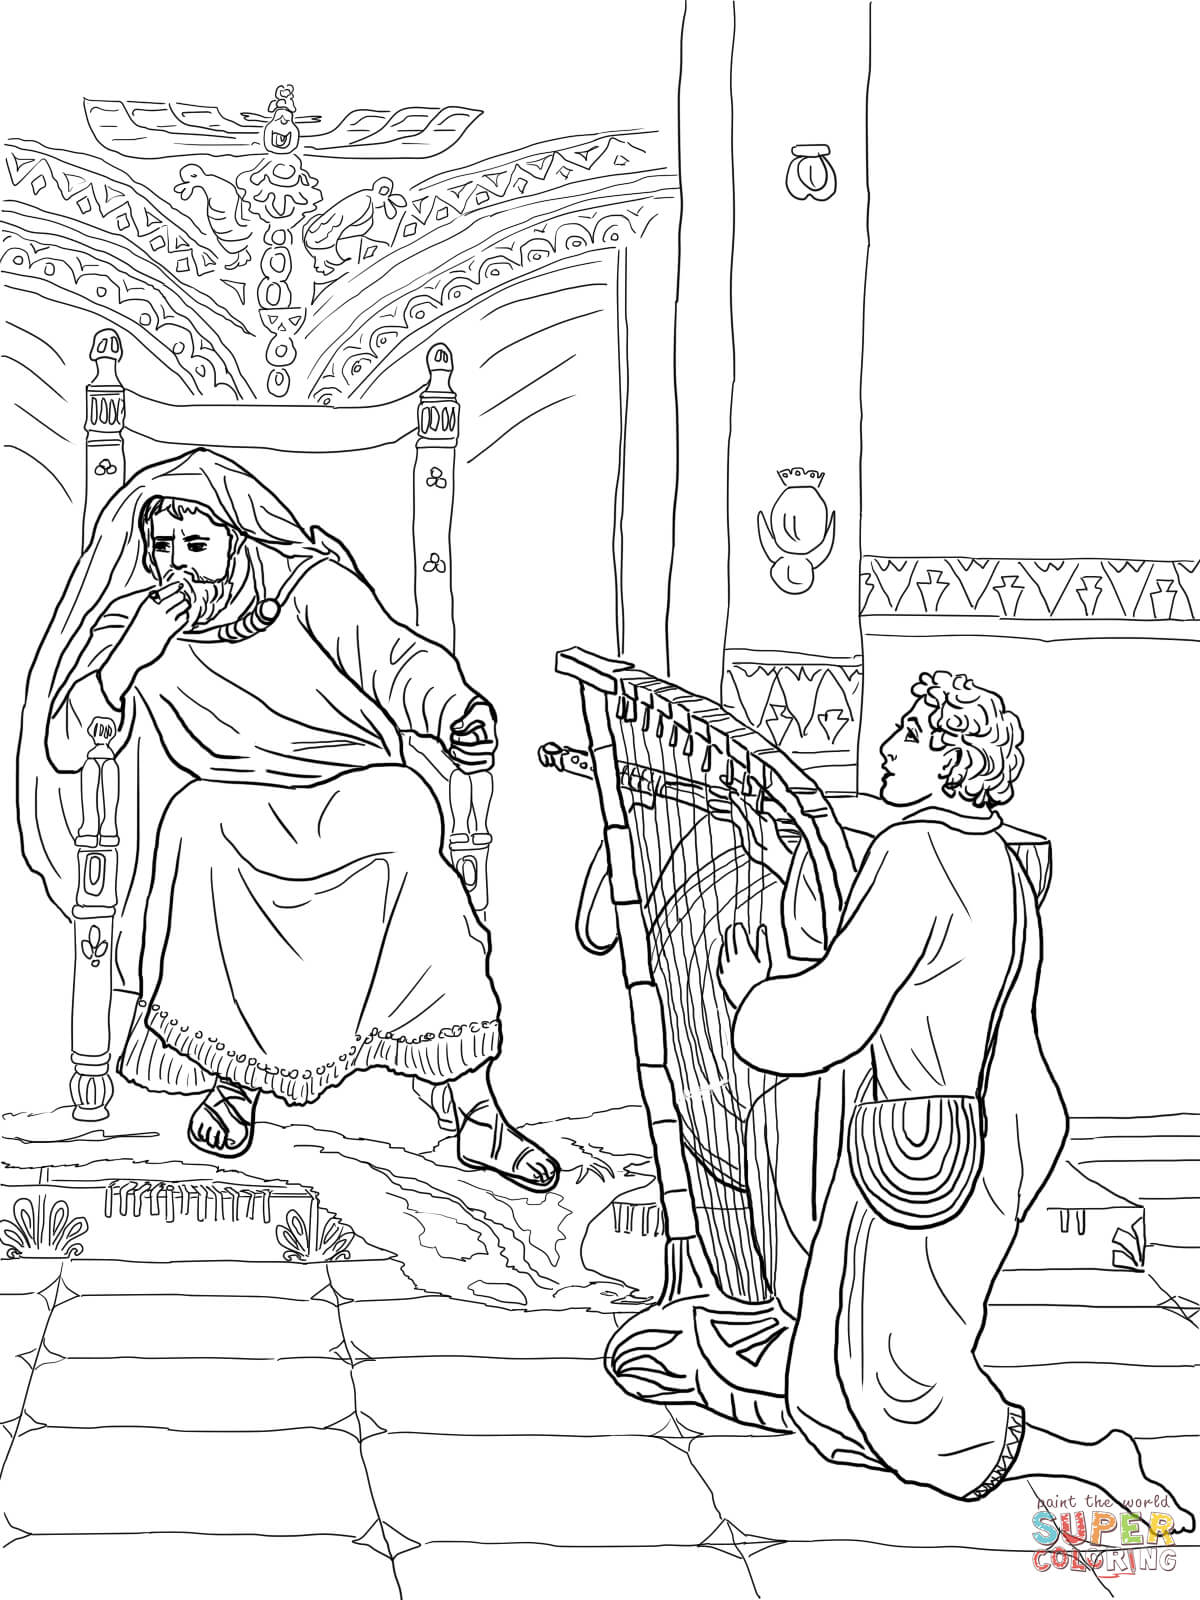 David Plays the Harp for Saul coloring page | Free Printable ...